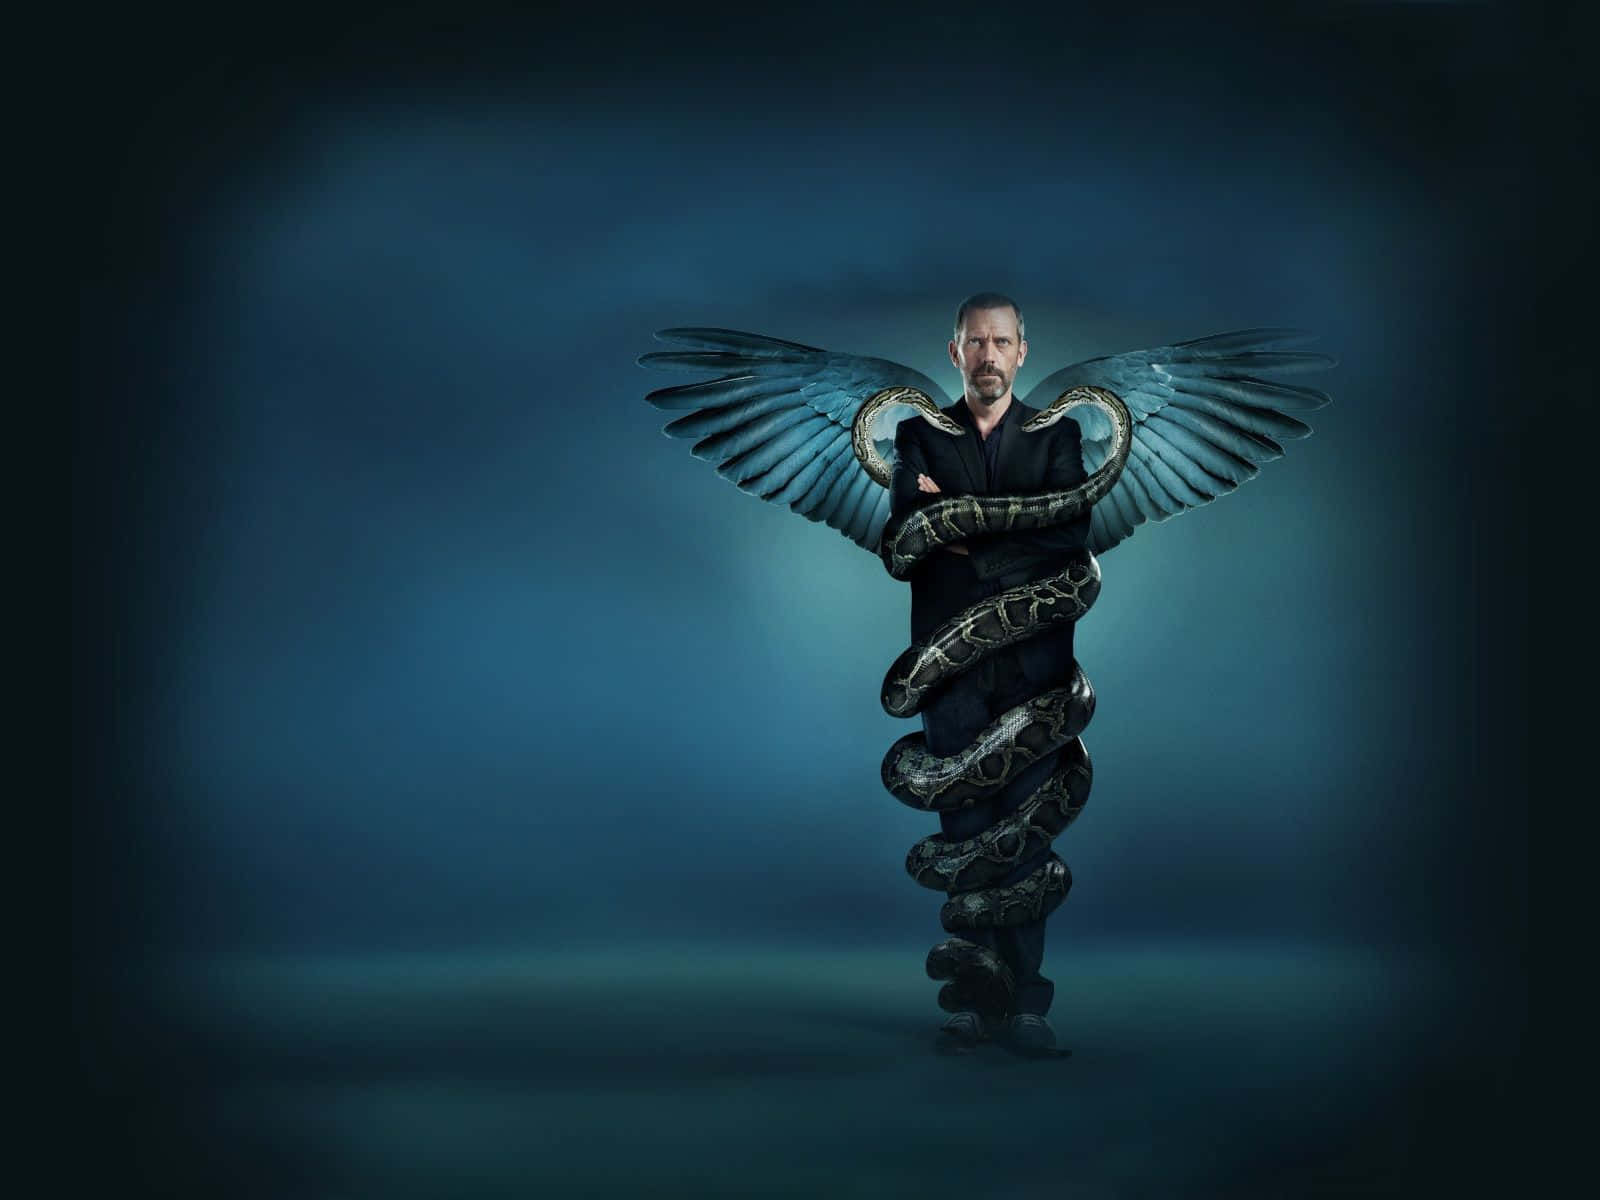 Hd Medical Staff With Wings And Snake Background